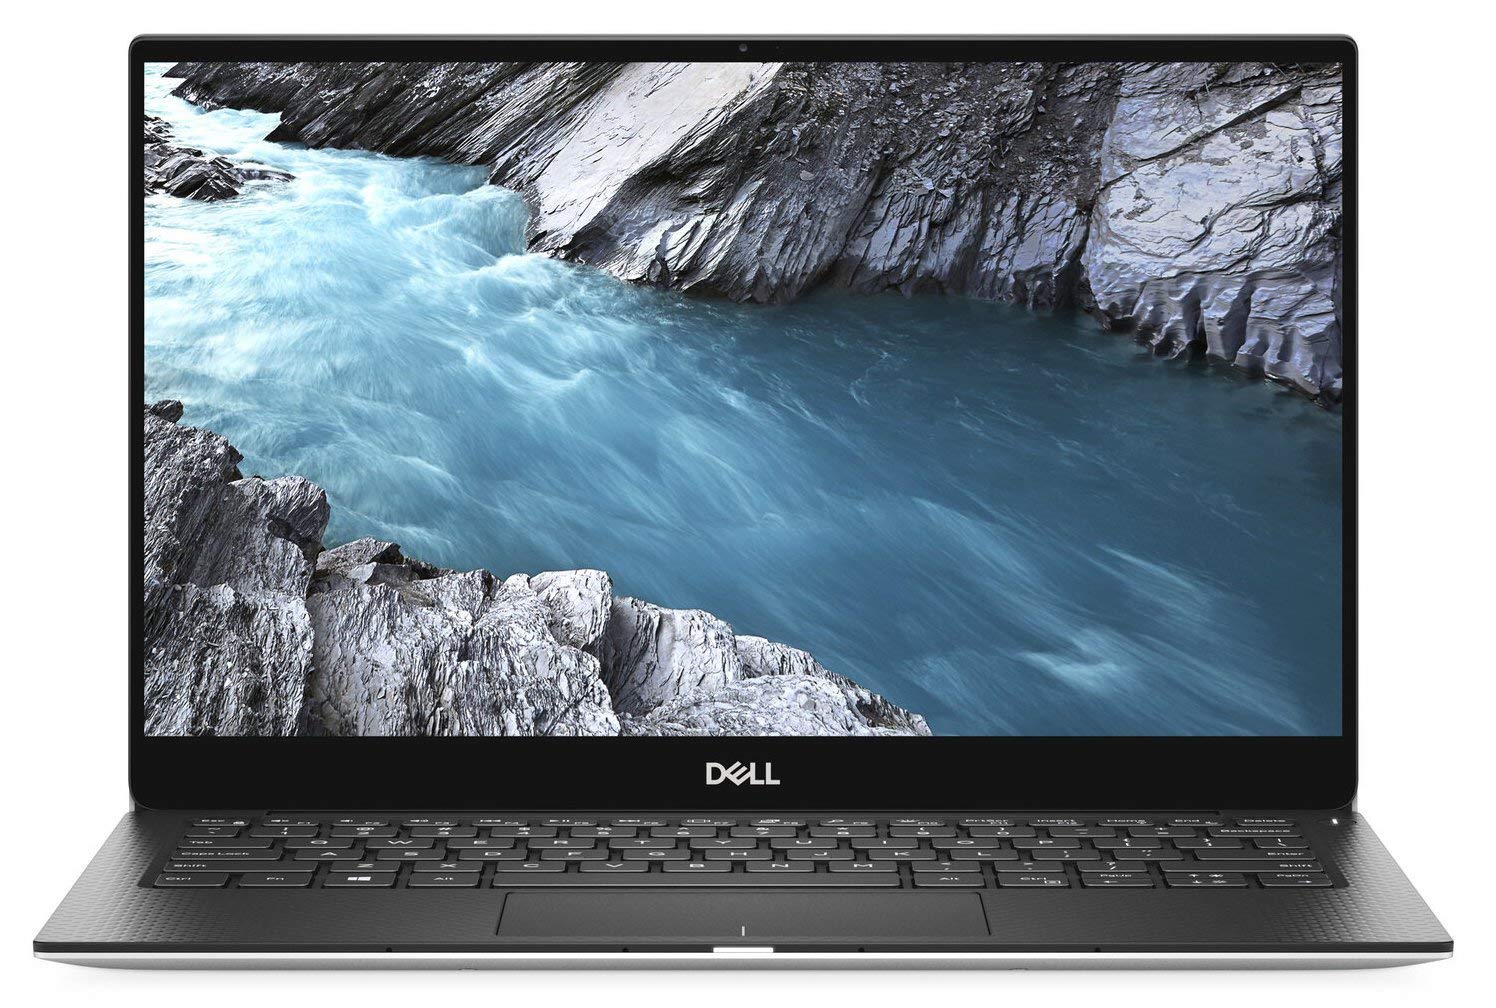 Dell XPS 13 - Amazon.in